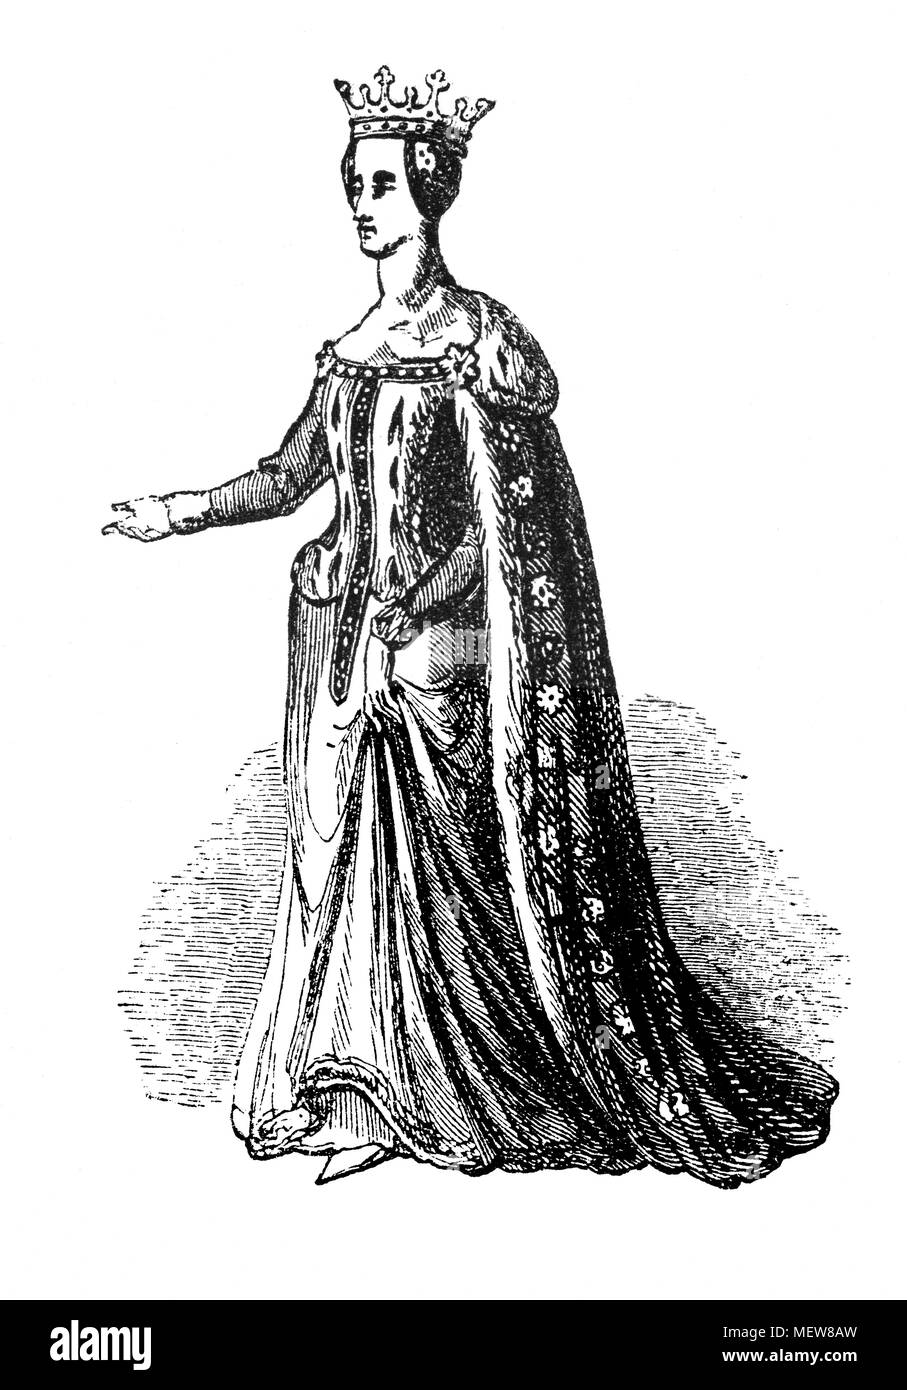 Catherine of Valois (1401 – 1437 was the queen consort of England from 1420 until 1422. A daughter of Charles VI of France, she married Henry V of England and gave birth to his heir Henry VI of England. Her liaison (and possible secret marriage) with Owen Tudor proved the springboard of that family's fortunes, eventually leading to their grandson's elevation as Henry VII of England. Catherine's older sister Isabella was queen of England from 1396 until 1399, as the child bride of Richard II. Stock Photo